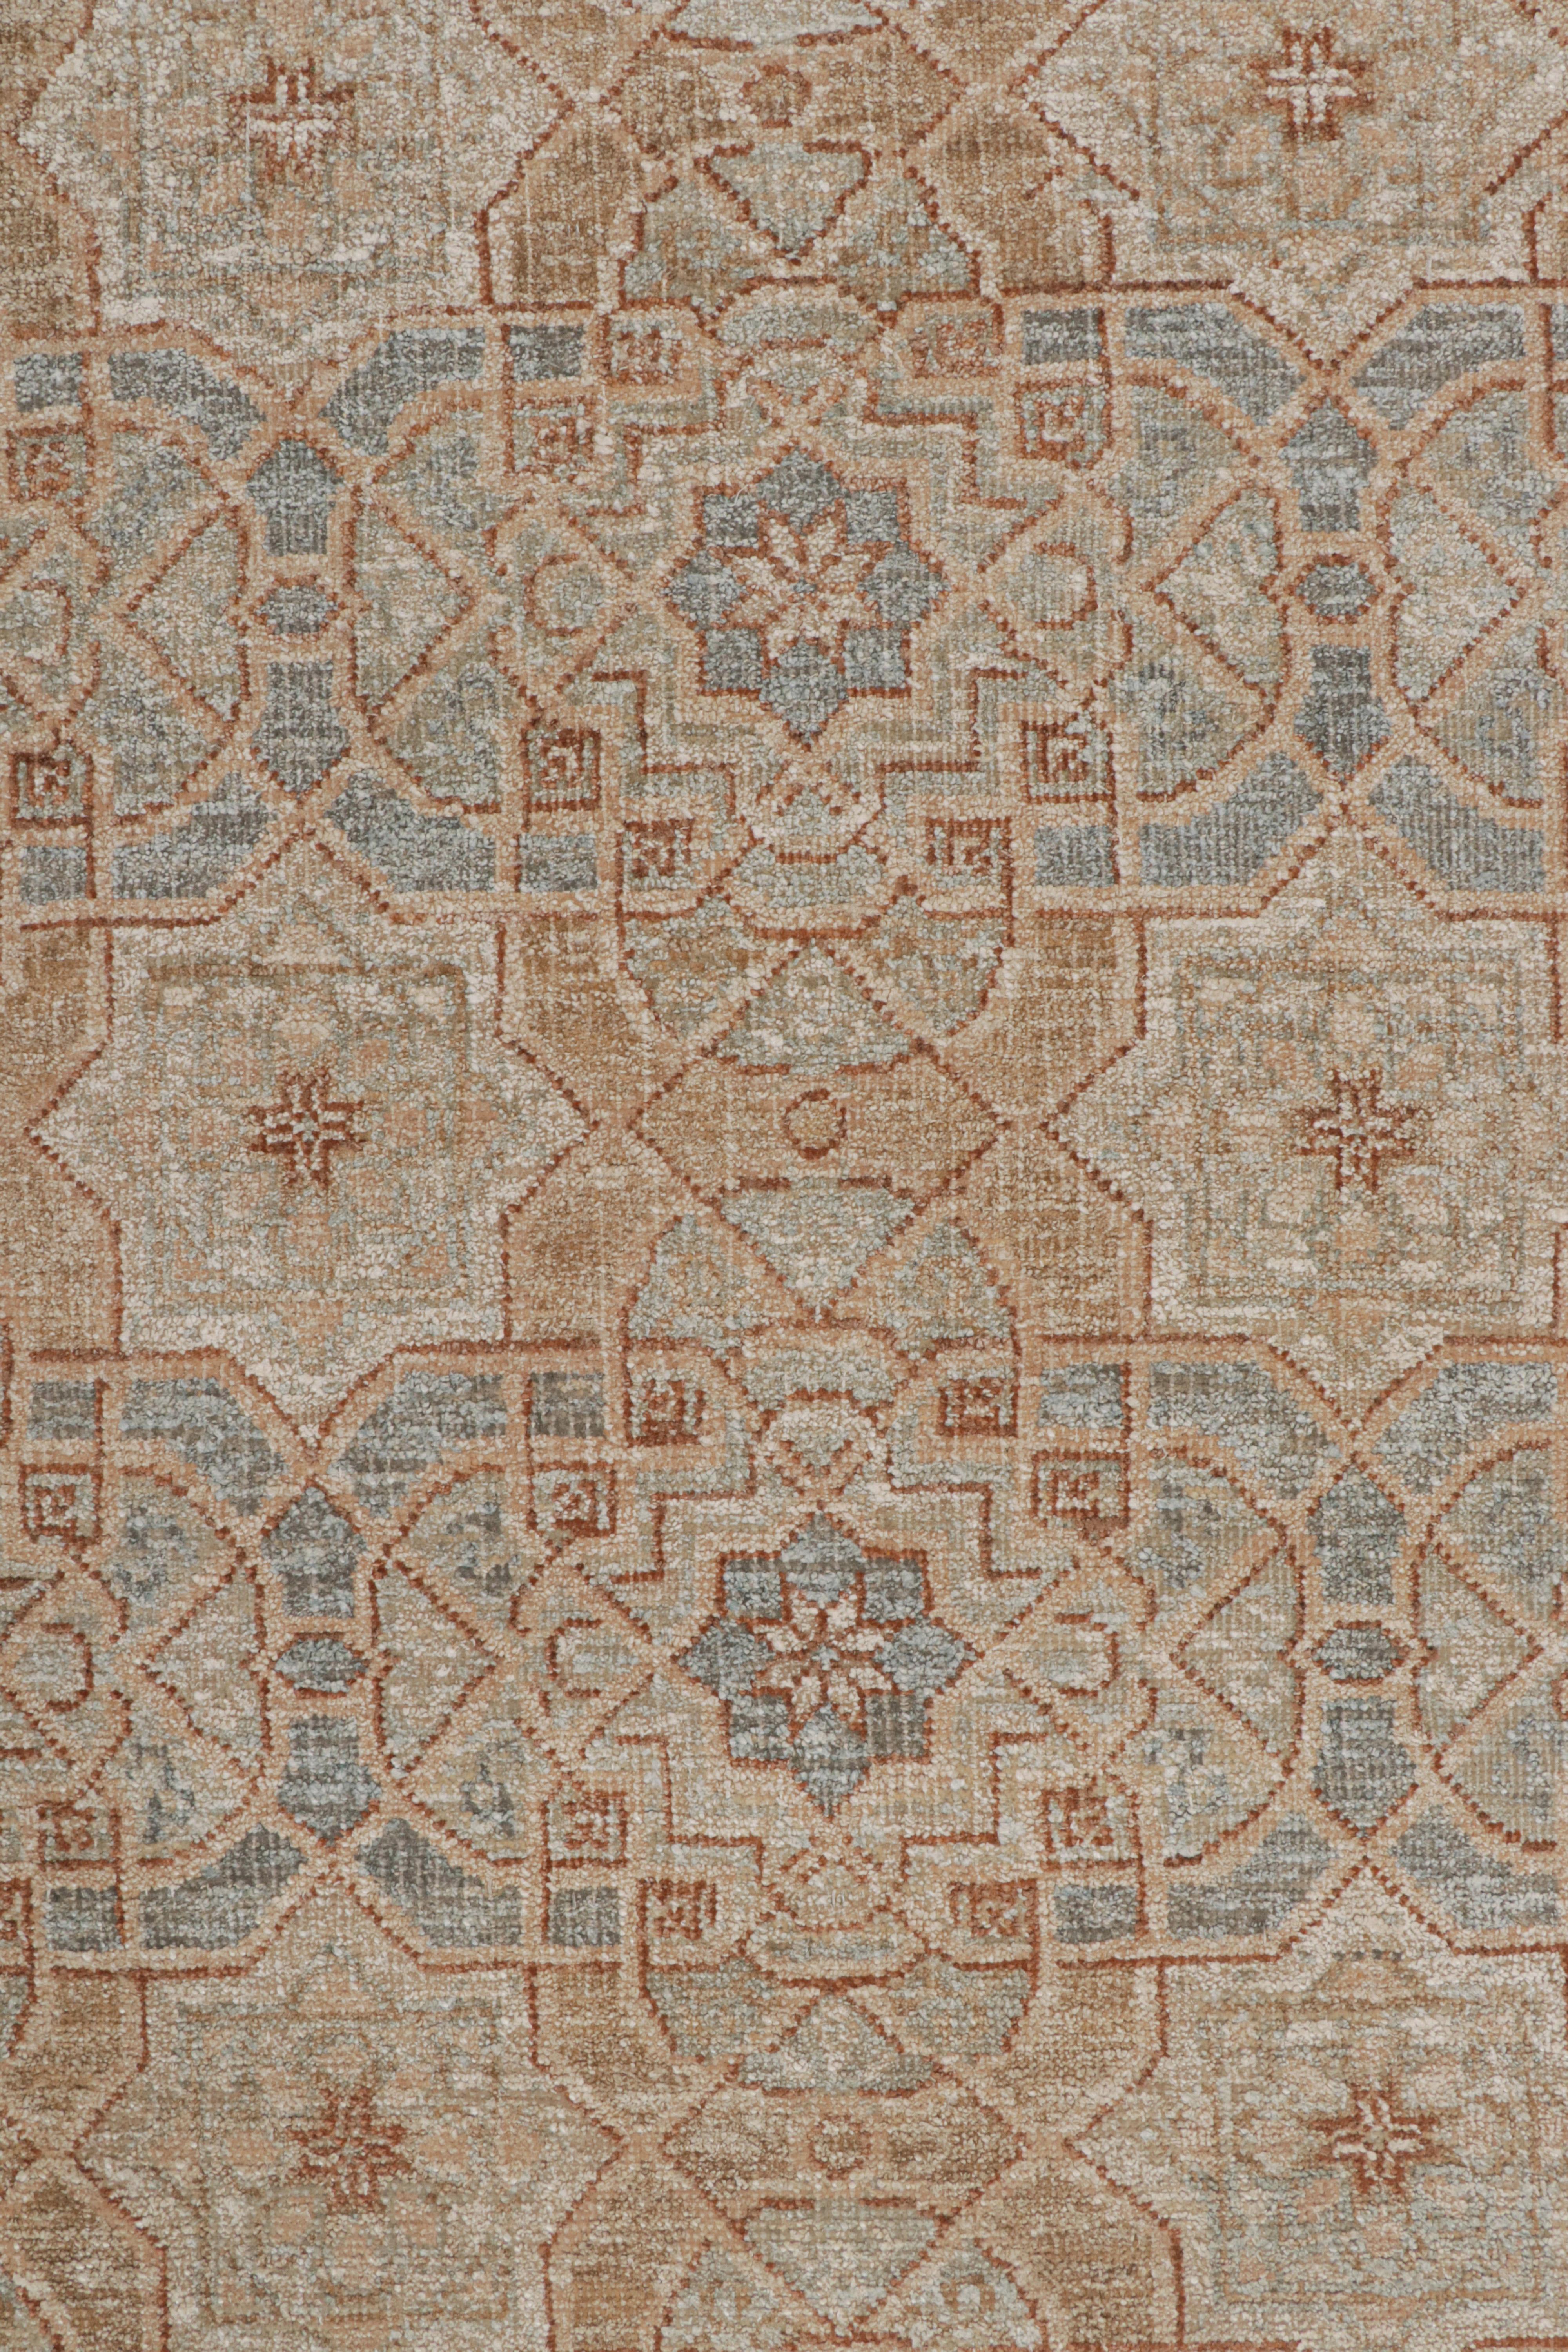 Contemporary Rug & Kilim’s Oushak Style Rug in Beige-Brown & Blue Geometric Patterns For Sale